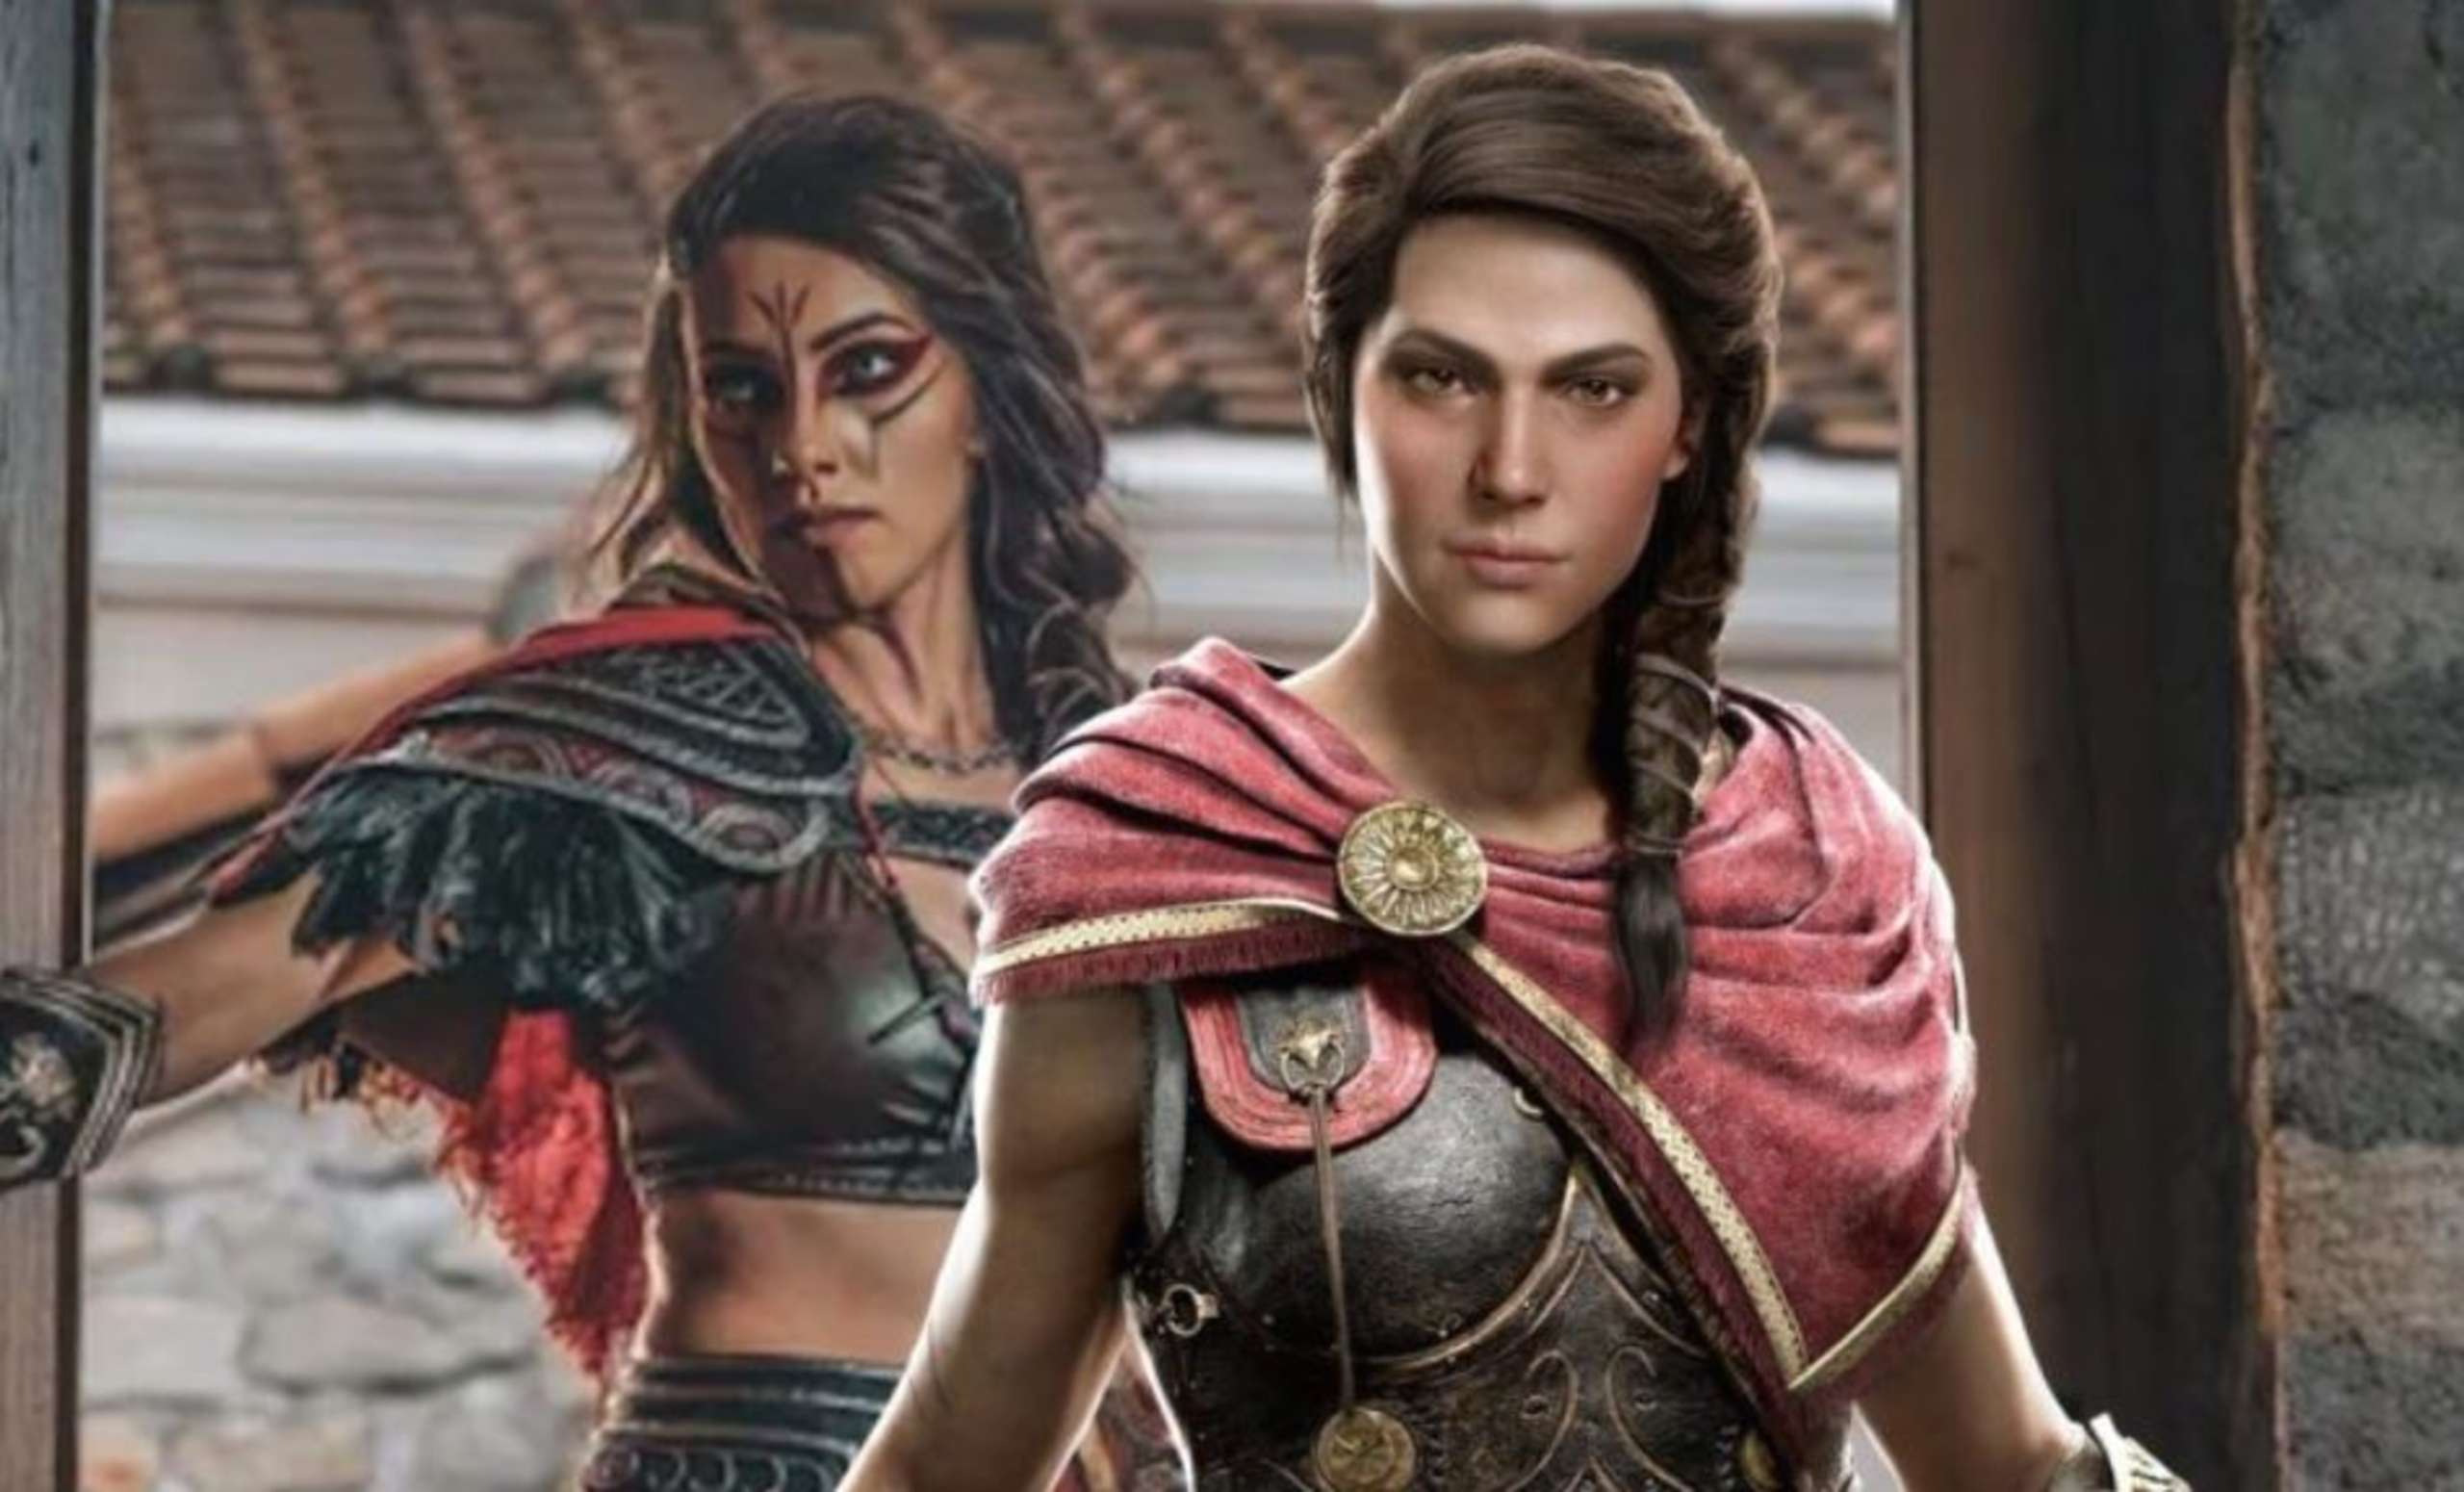 That Kassandra Costume From Assassin’s Creed Odyssey Looks Fantastic. It Captures The Essence Of The Spartan Warrior Down To The Face Paint And Renegade Armor